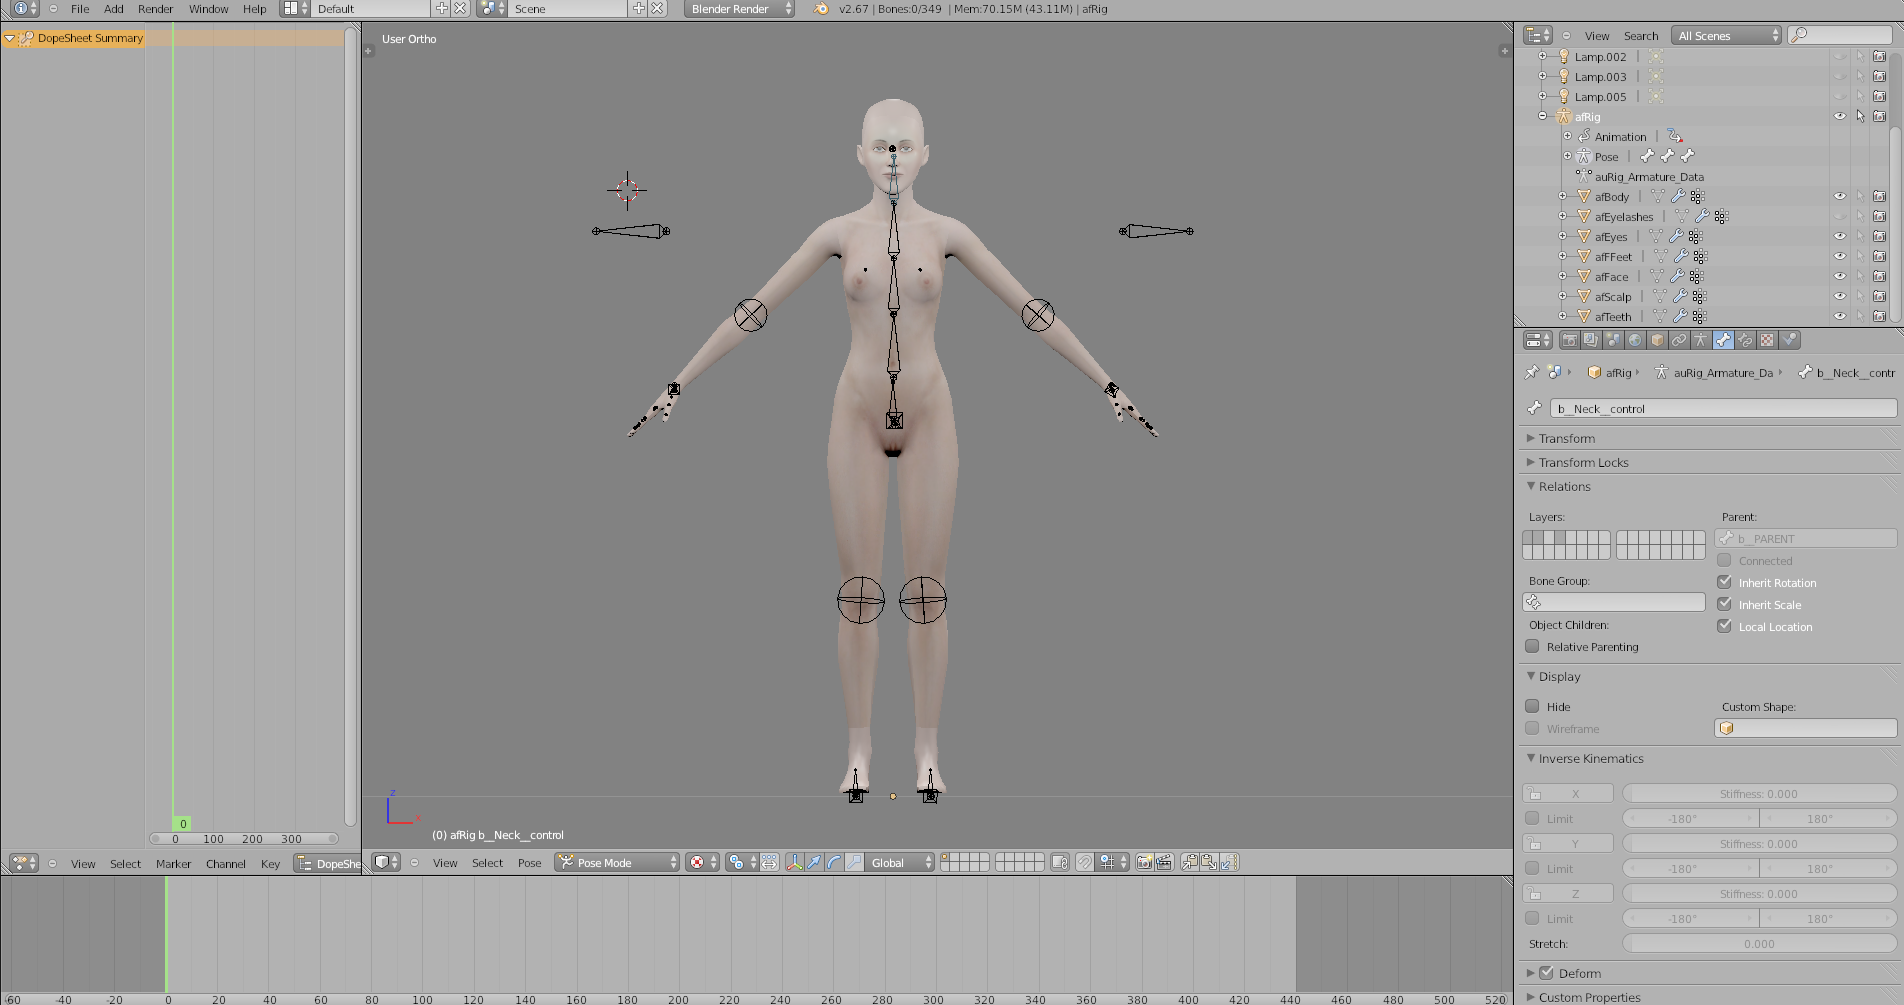 1626240704_BlenderD__Animations-Poses_Rigs-IK_ForRelease_MJ_afRig_IKcontrol.blend2_8_20214_05_01PM.png.7ee8b89ca1f2ddc9925ca4a184aa8cac.png